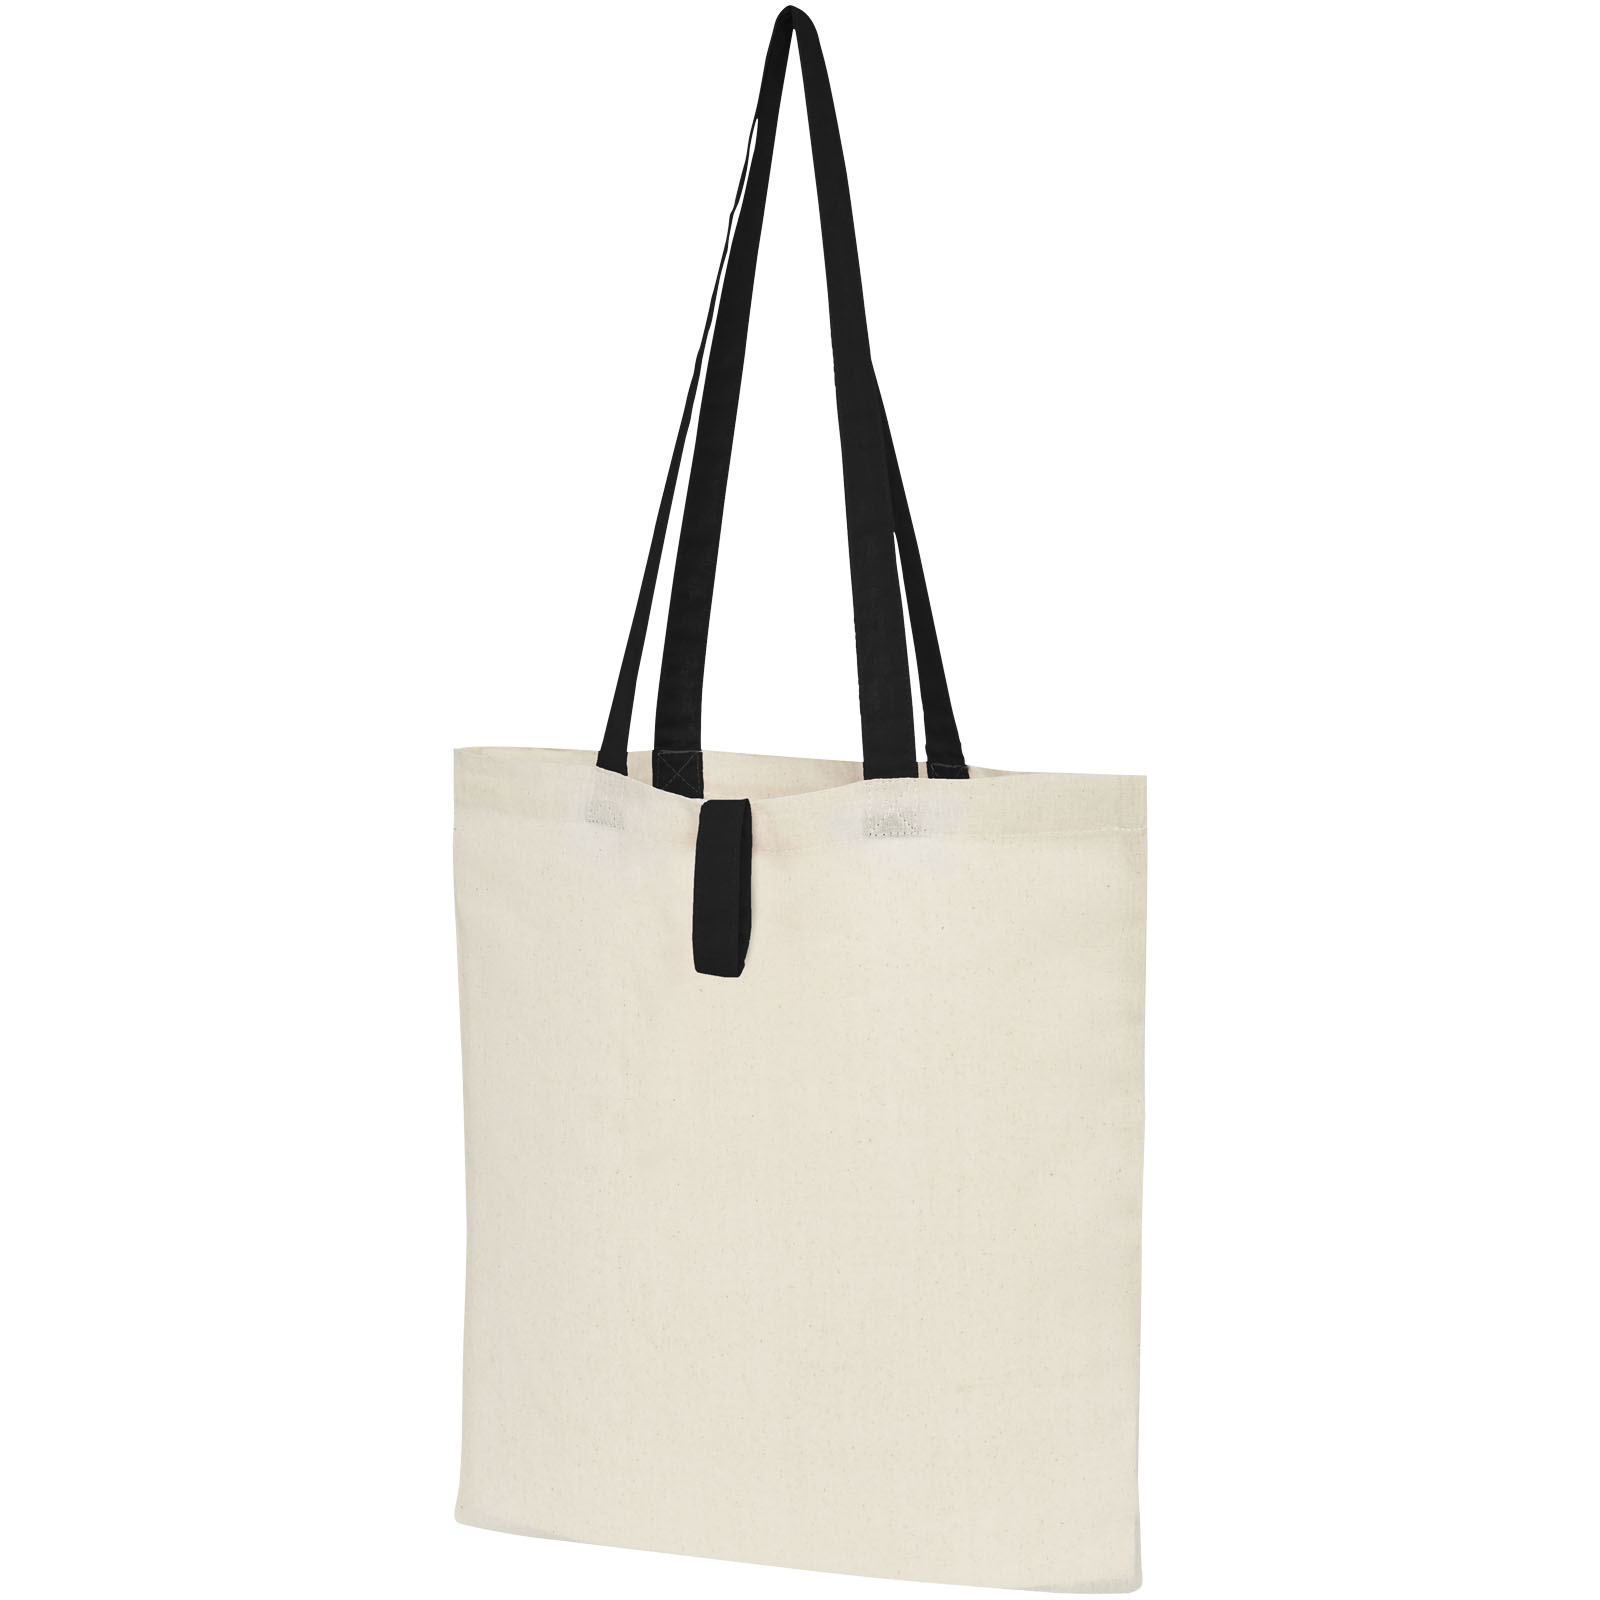 Shopping & Tote Bags - Nevada 100 g/m² cotton foldable tote bag 7L